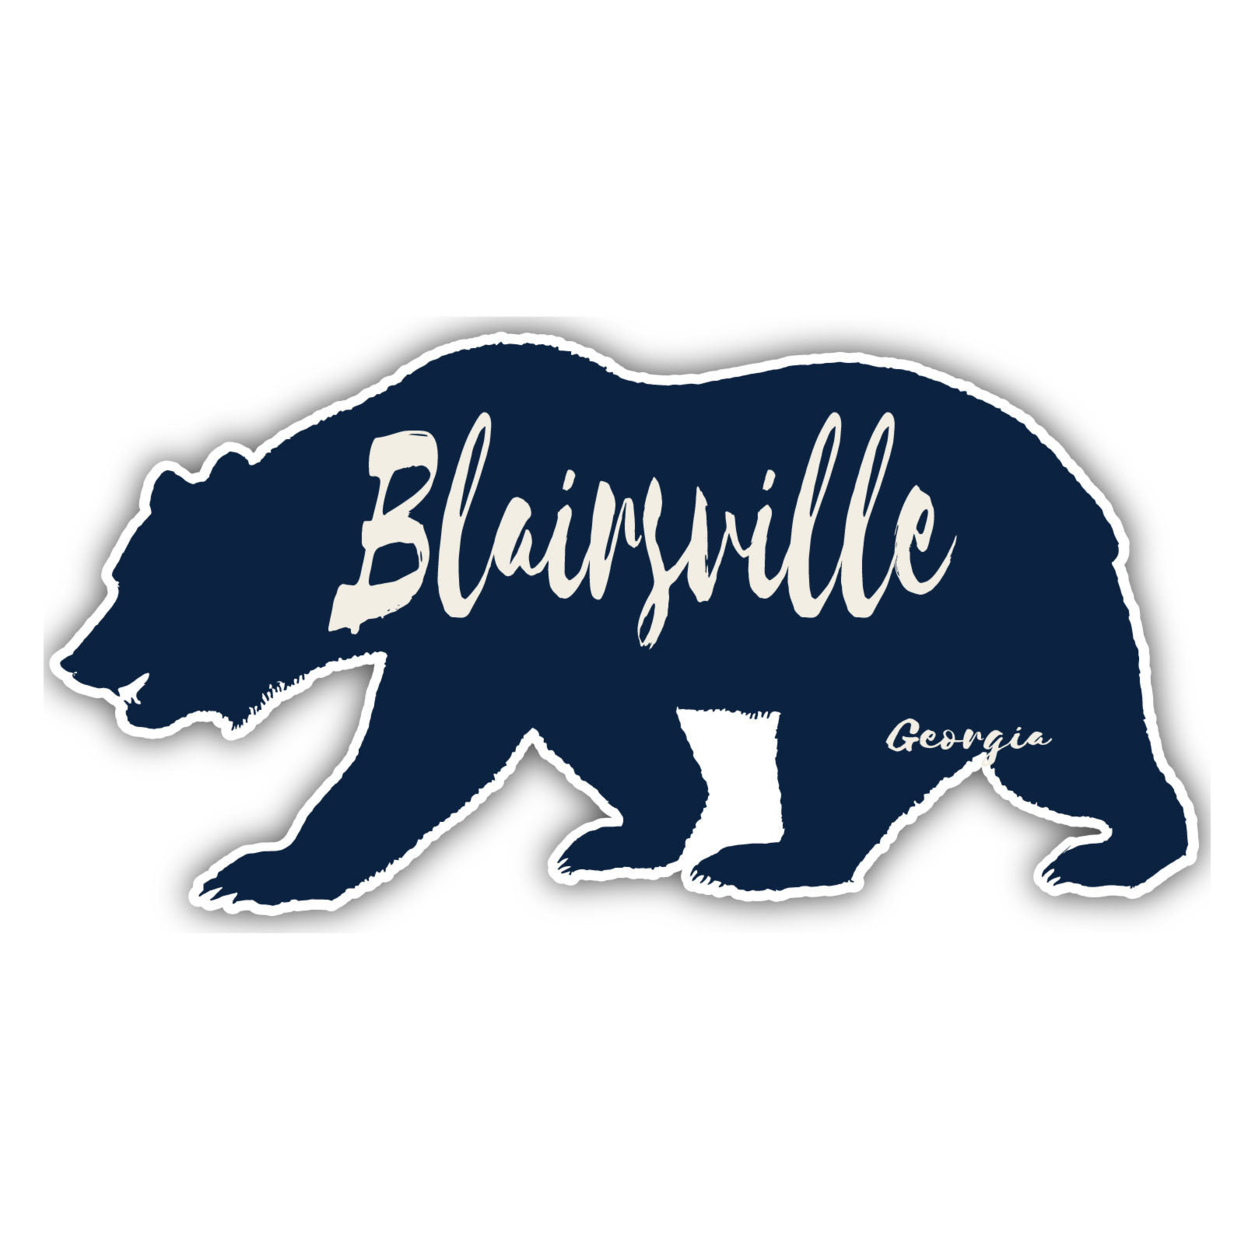 Blairsville Georgia Souvenir Decorative Stickers (Choose Theme And Size) - 4-Pack, 12-Inch, Tent